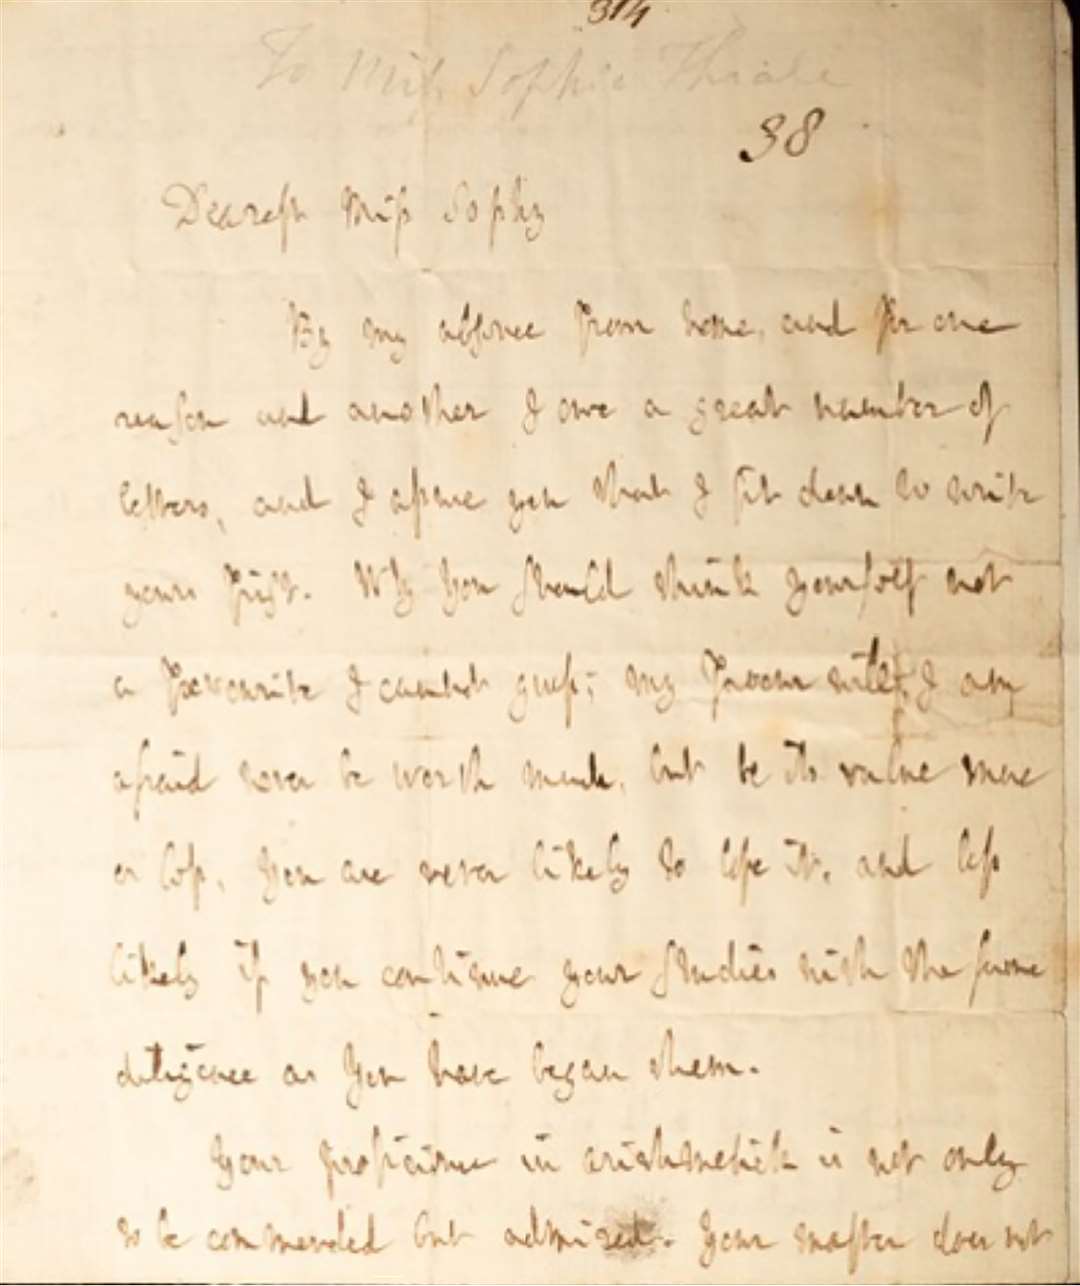 A recently discovered letter by English writer Dr Samuel Johnson has sold for £38,460 at auction (Chorley’s/PA)